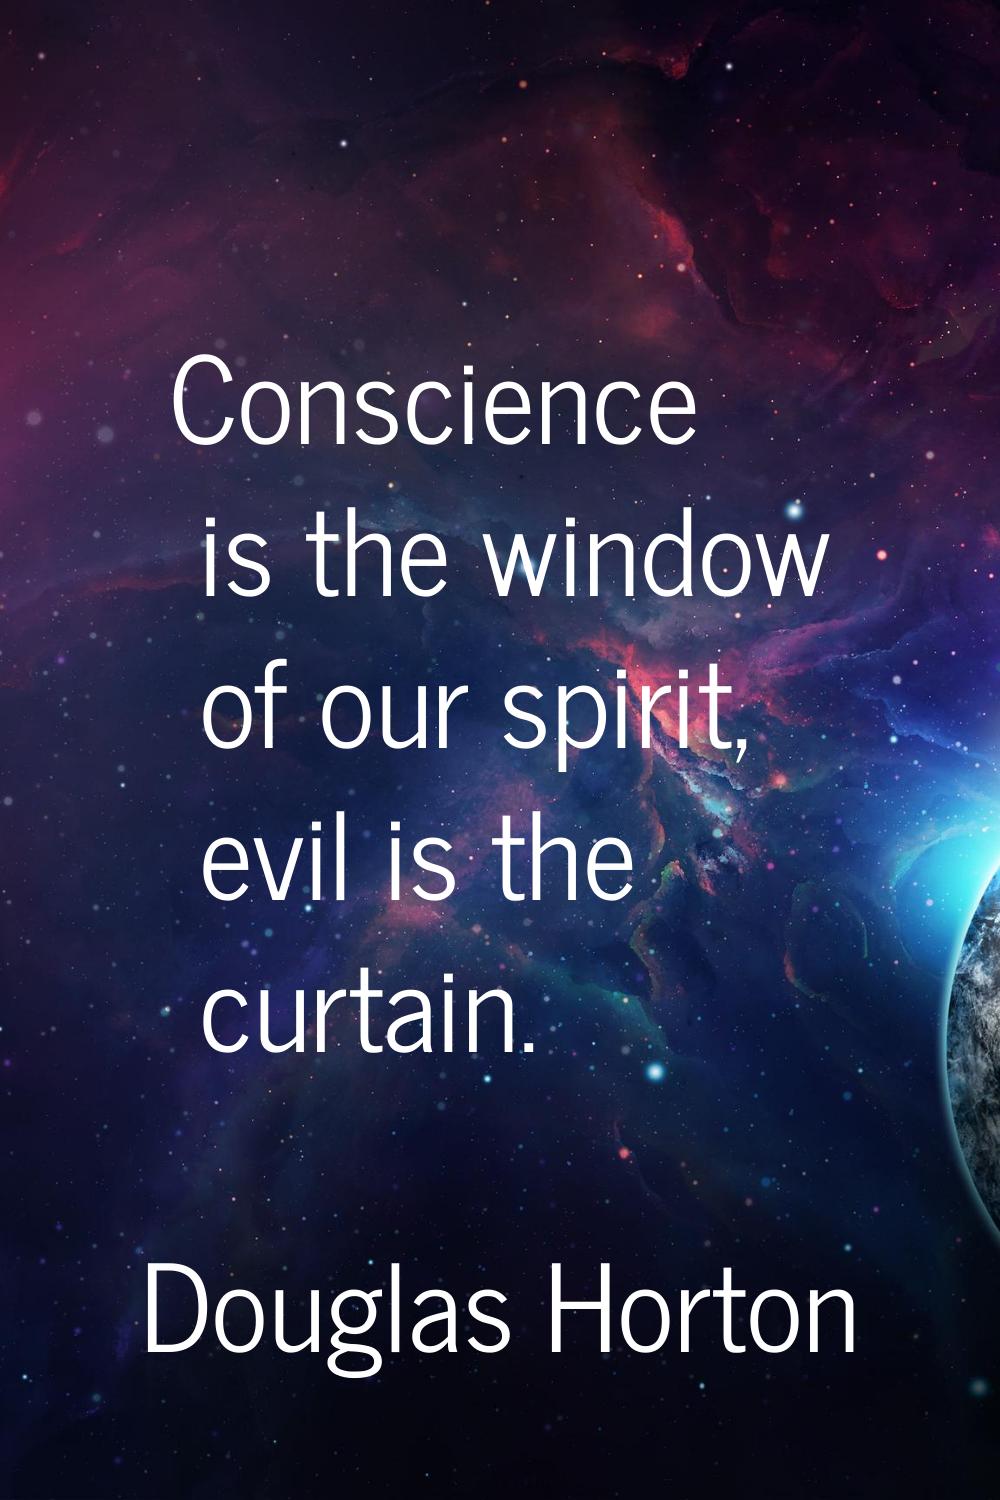 Conscience is the window of our spirit, evil is the curtain.